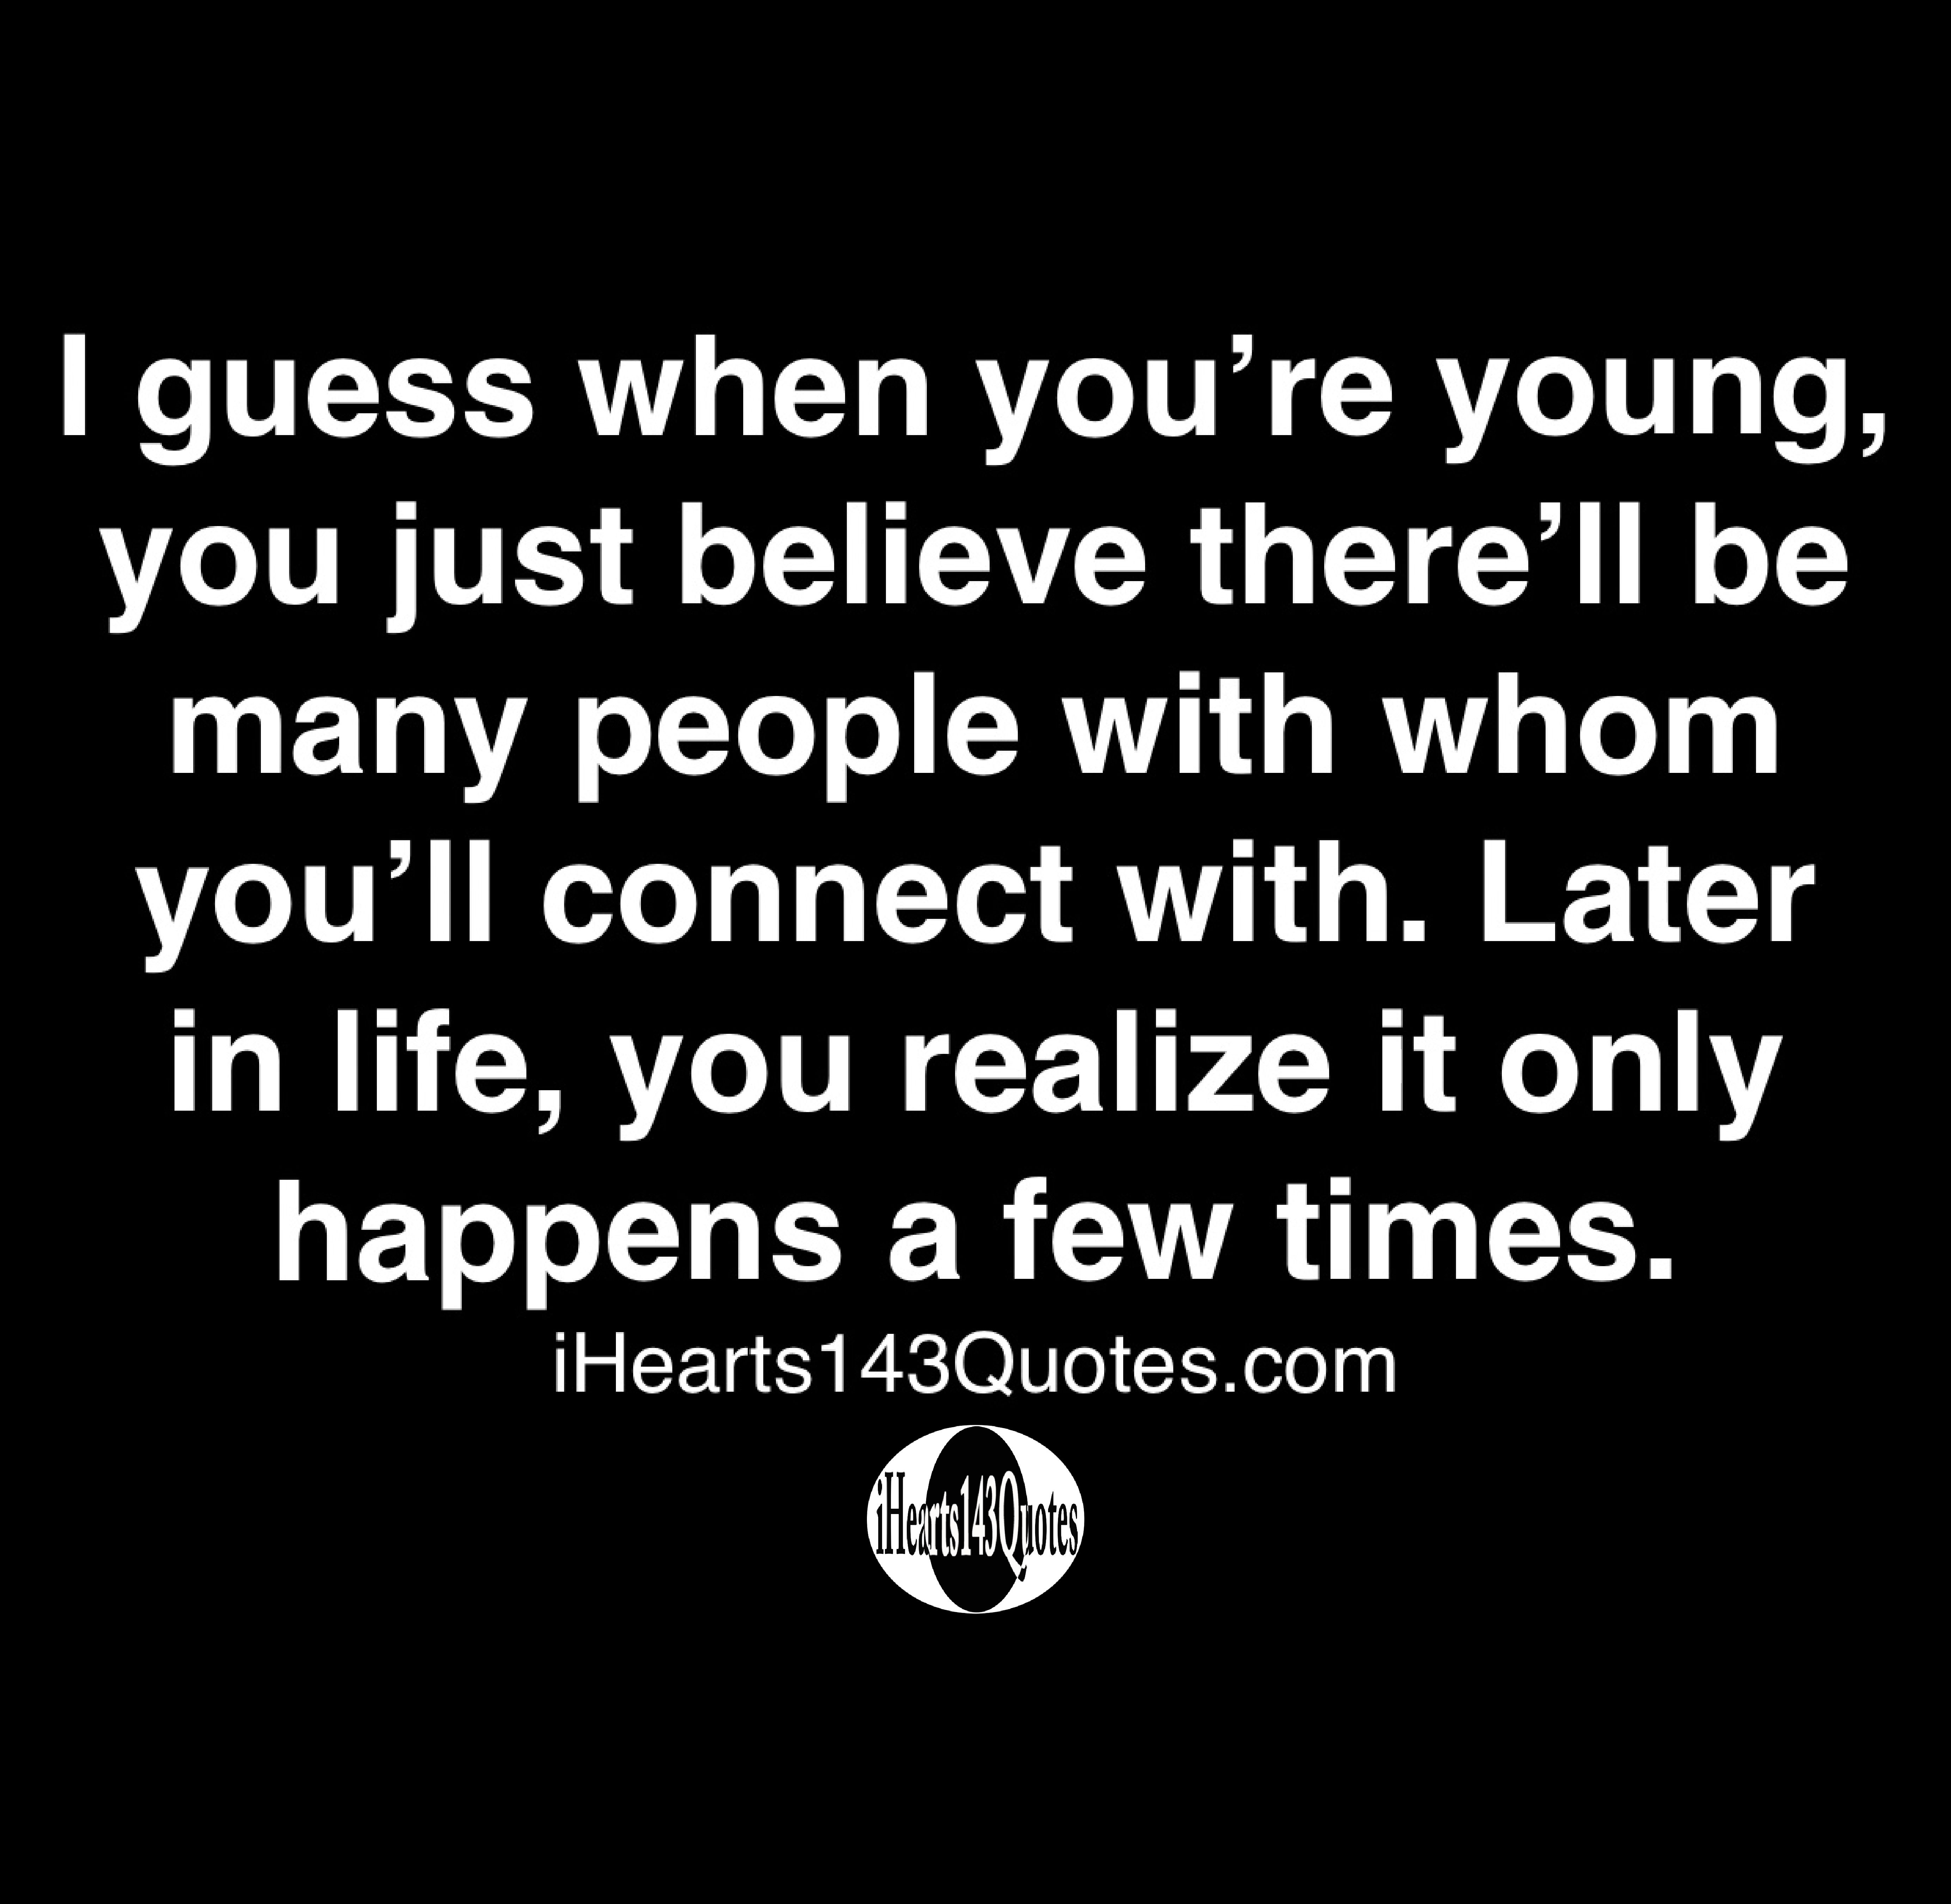 I when you're young, you just believe there'll be many people with whom you'll connect with. Later in life, you realize it only a few times Quotes - iHearts143Quotes